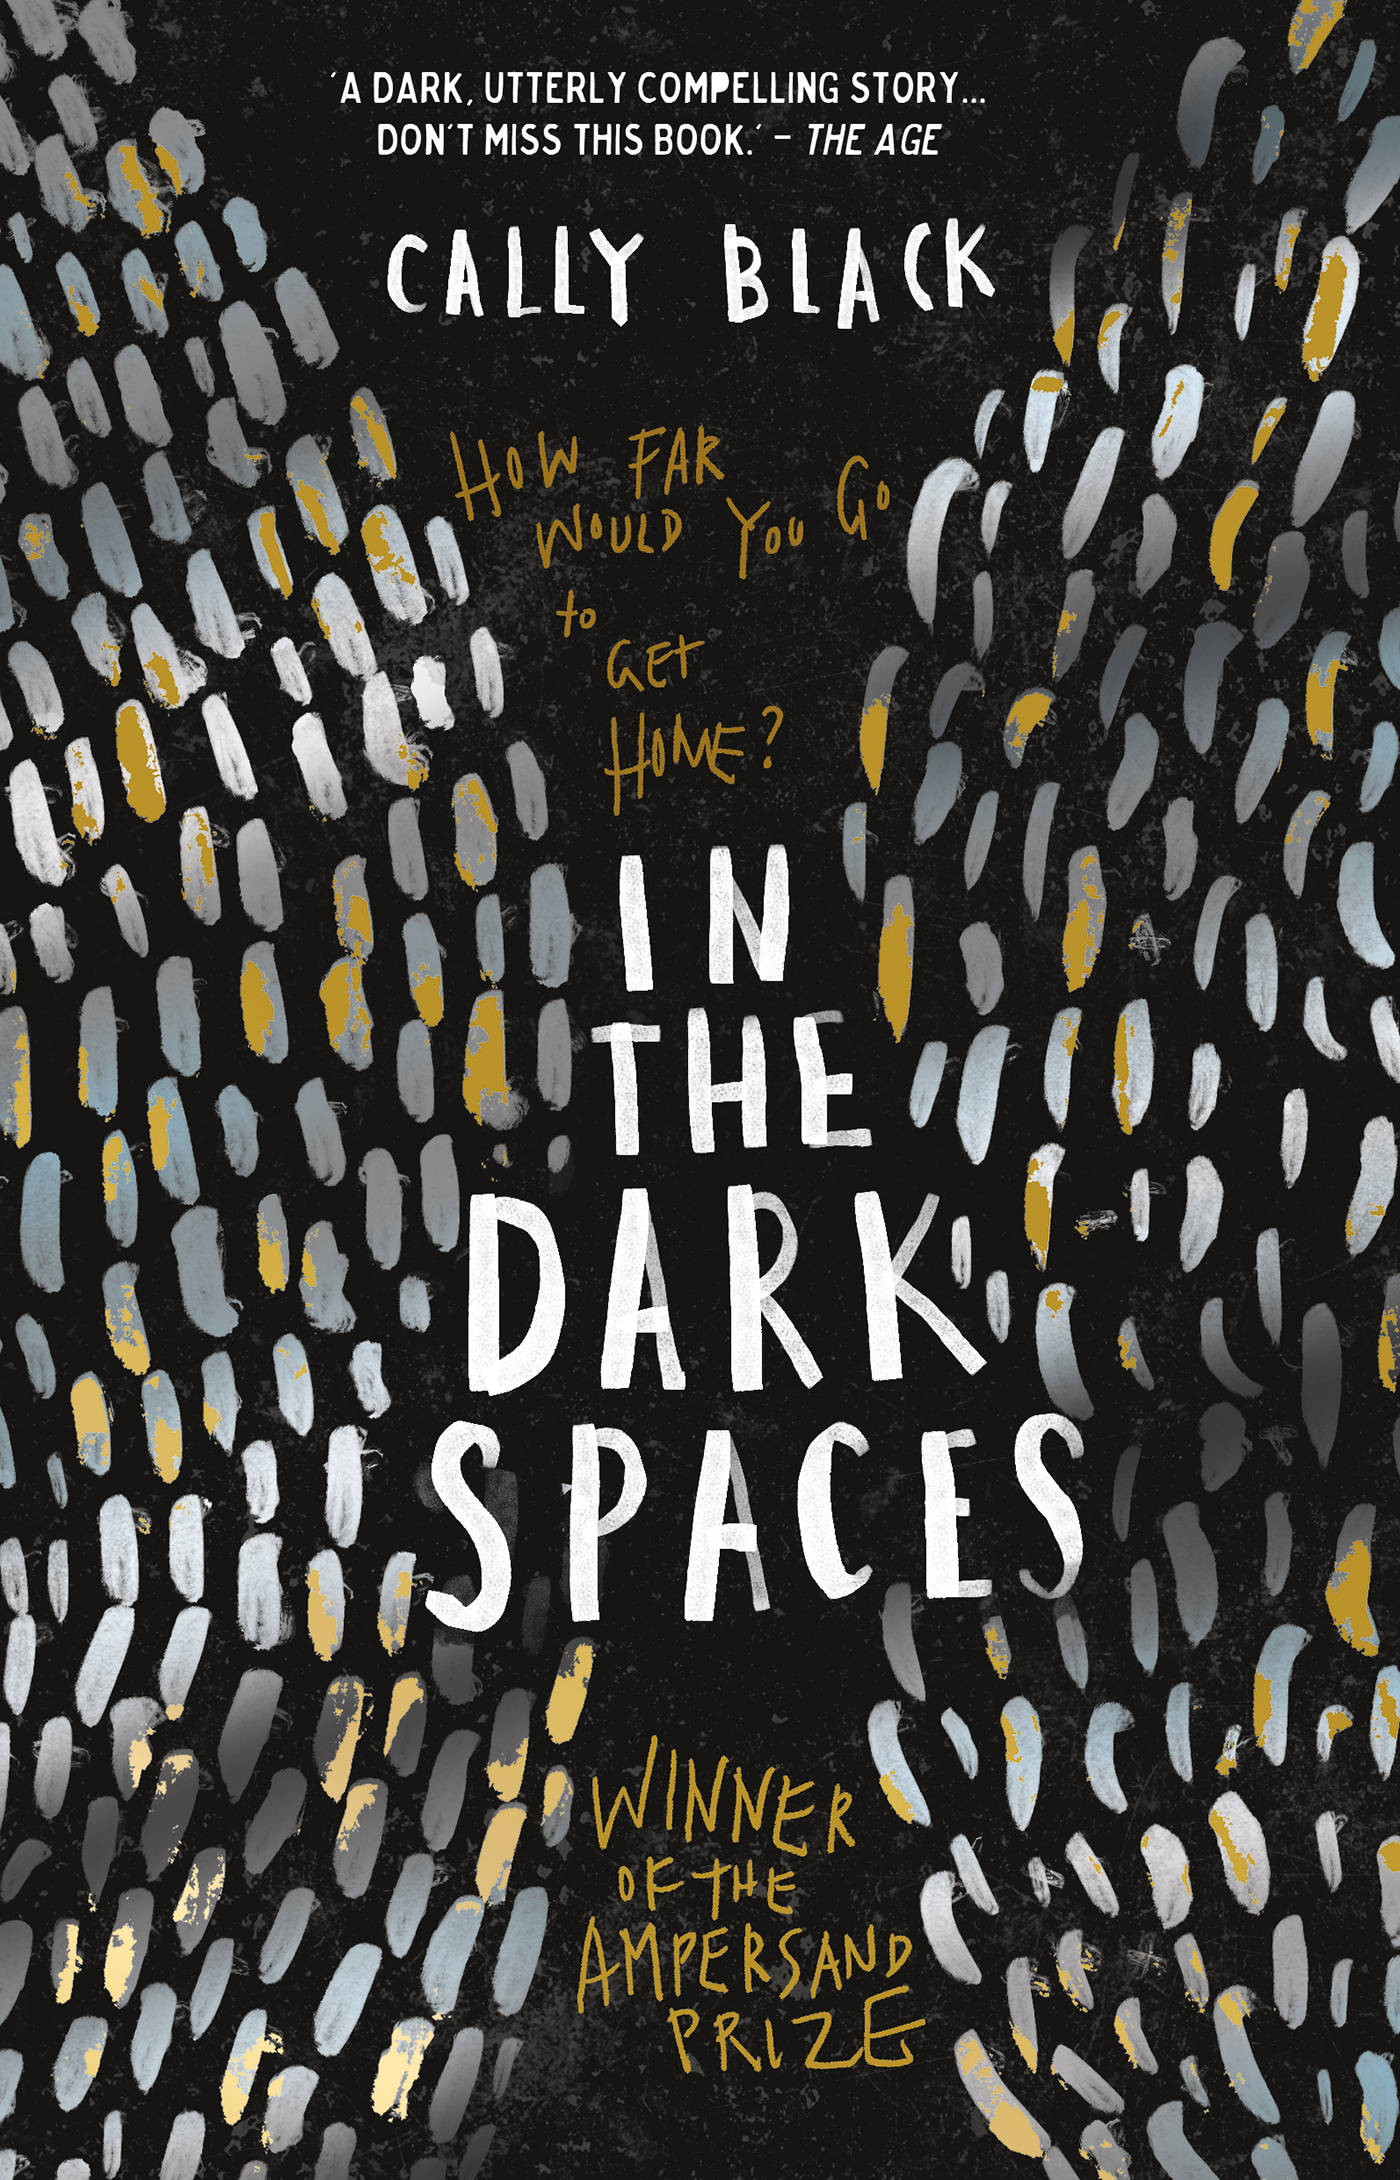 In The Dark Spaces